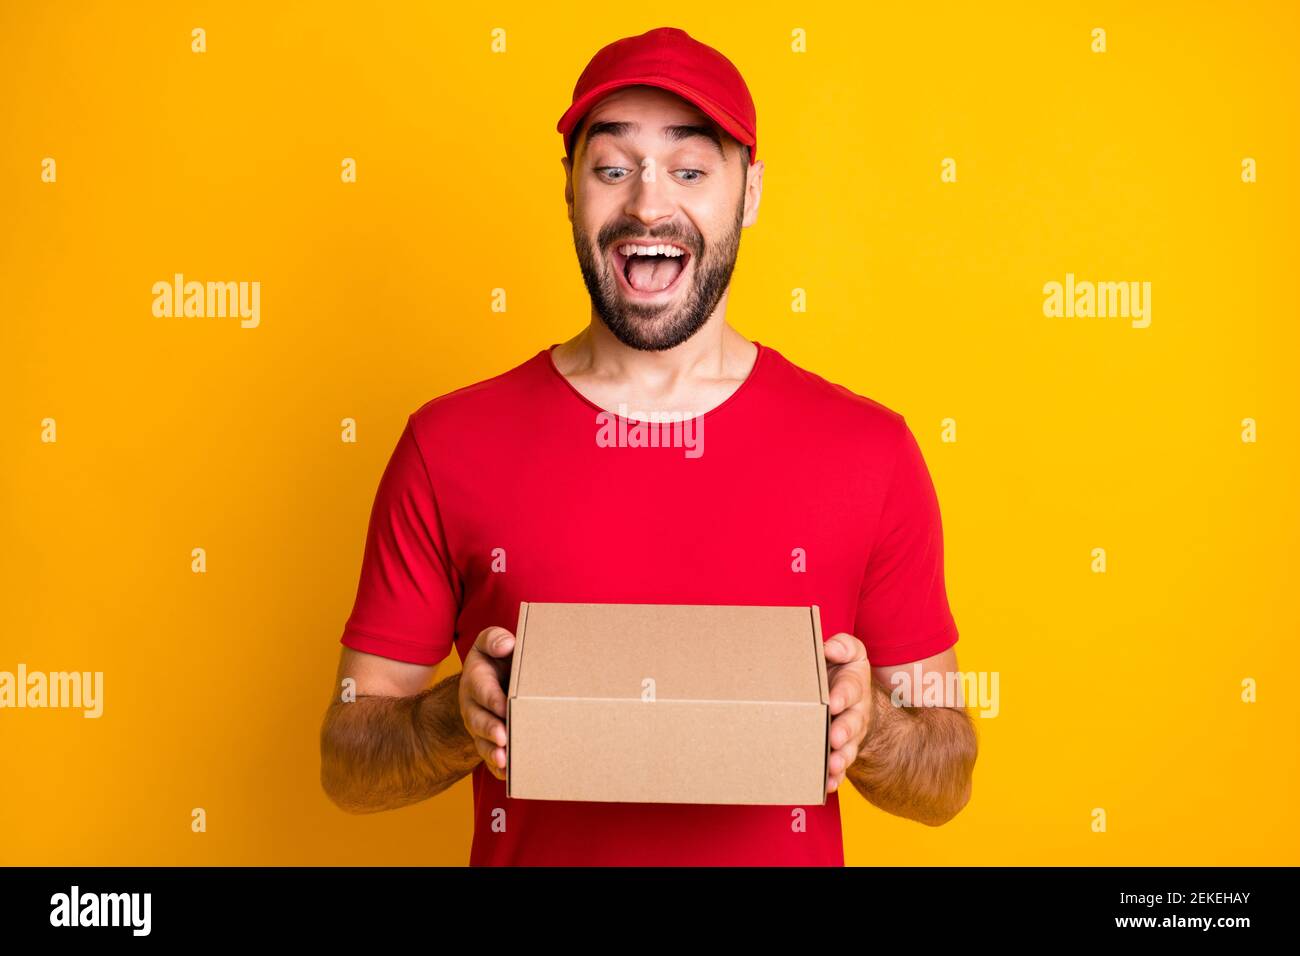 Photo portrait of funny laughing man delivering carton package in red clothes isolated on vivid yellow color background Stock Photo